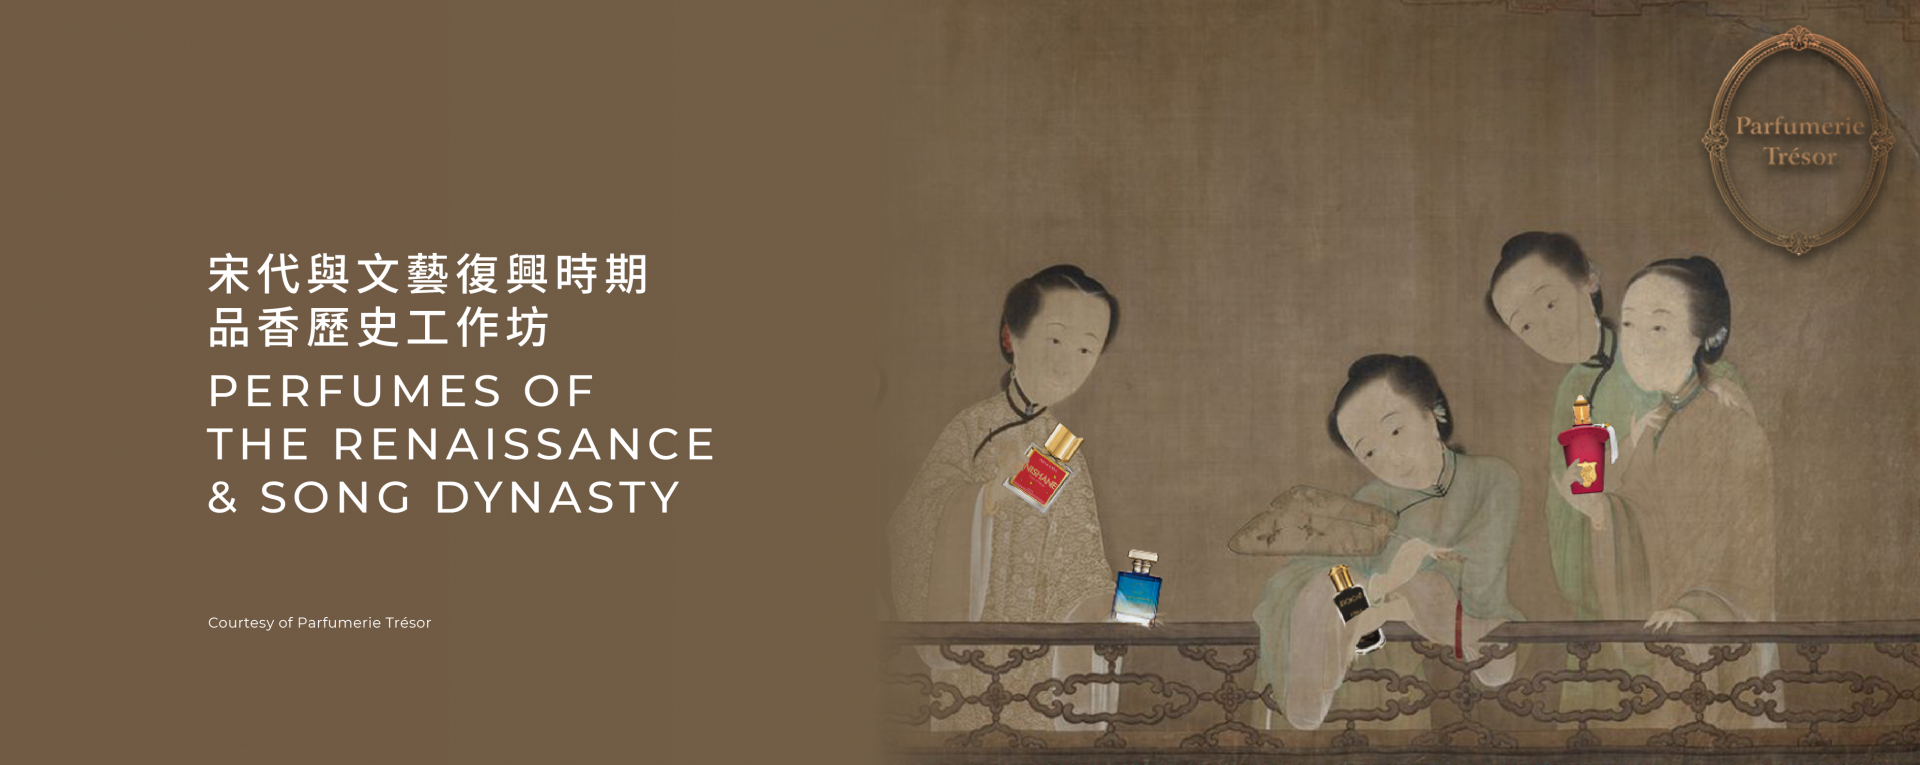 Perfumes of the Renaissance & Song Dynasty